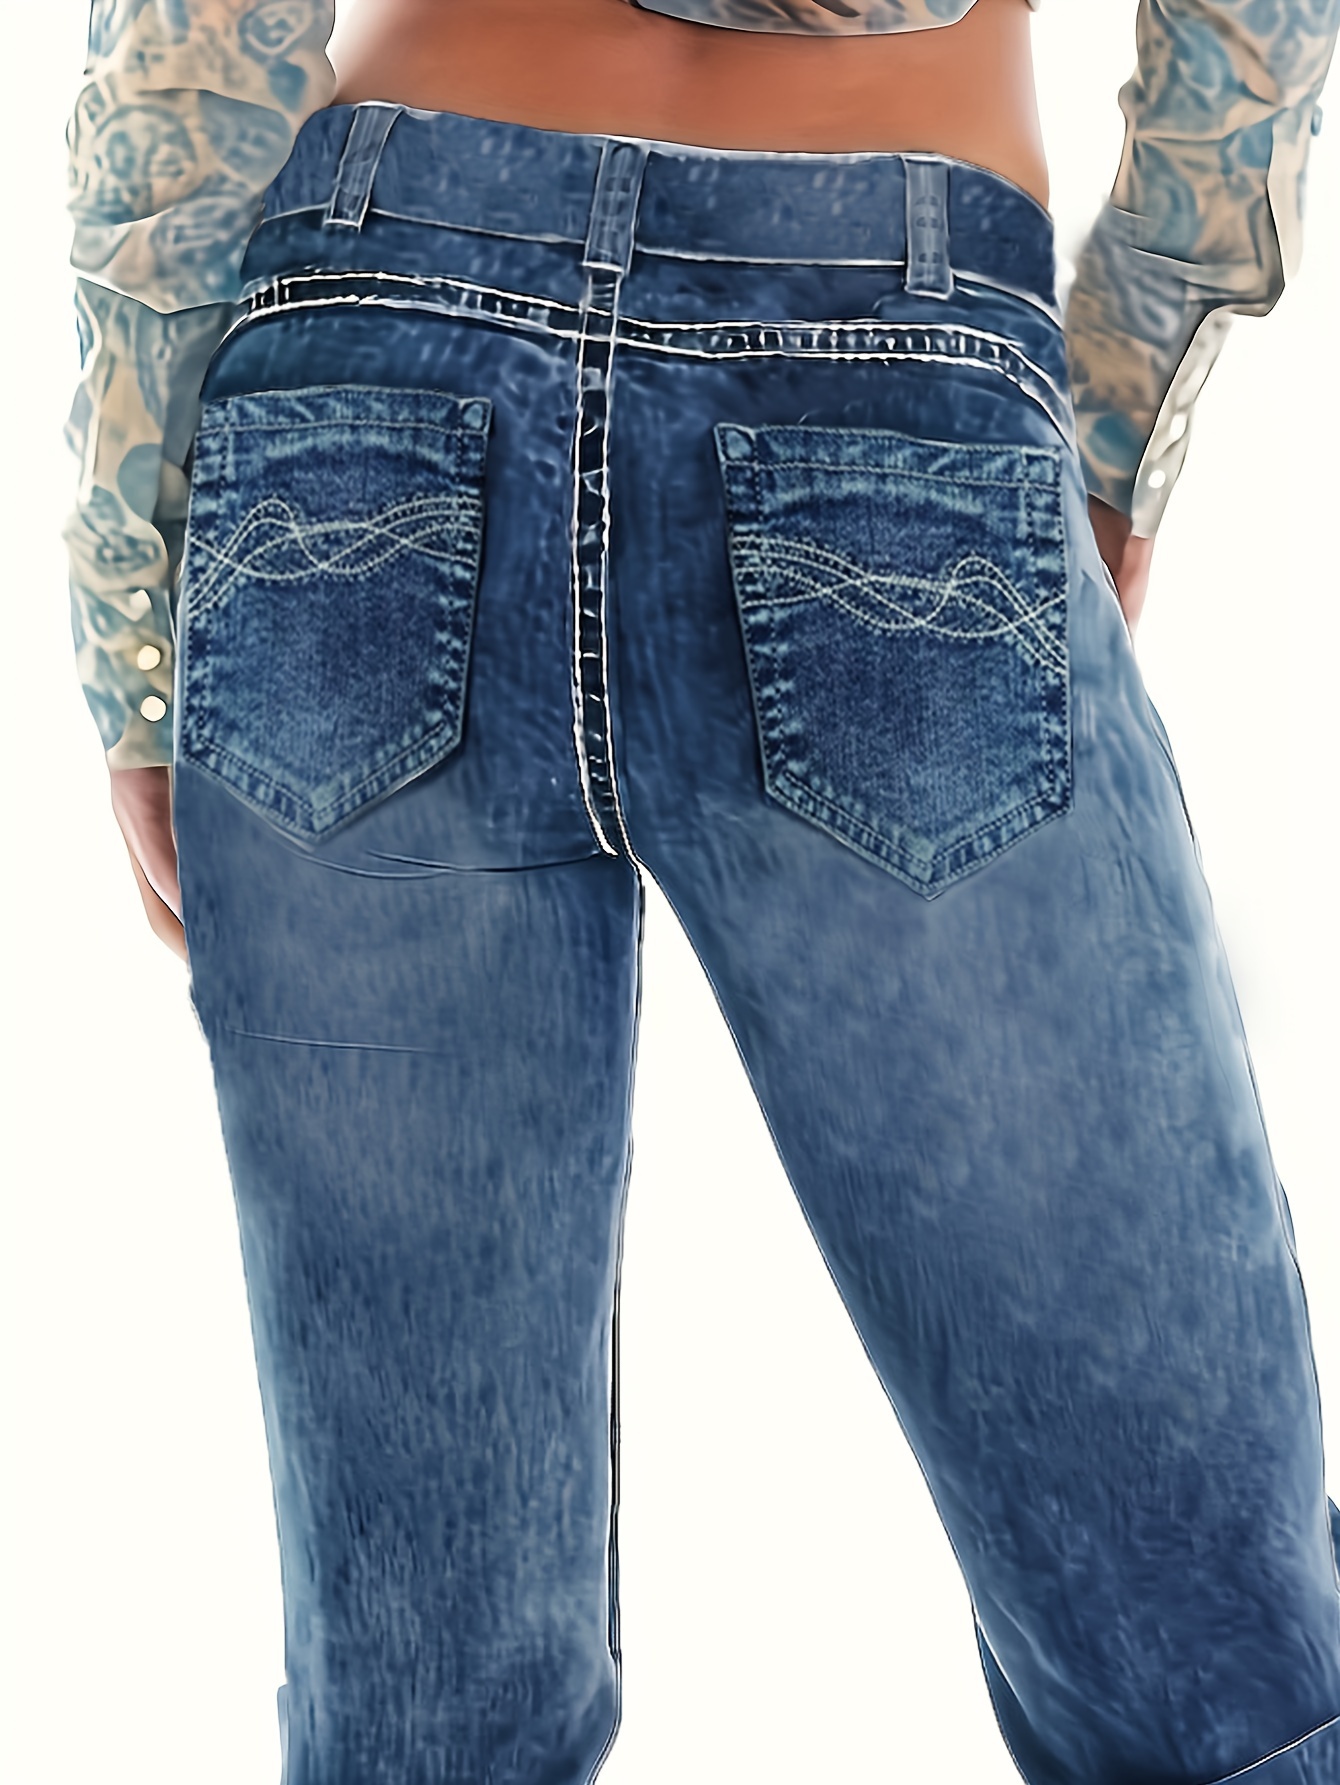 High Waist Chic Stacked Jeans, Slant Pockets High Stretch Bootcut Jeans,  Women's Denim Jeans & Clothing